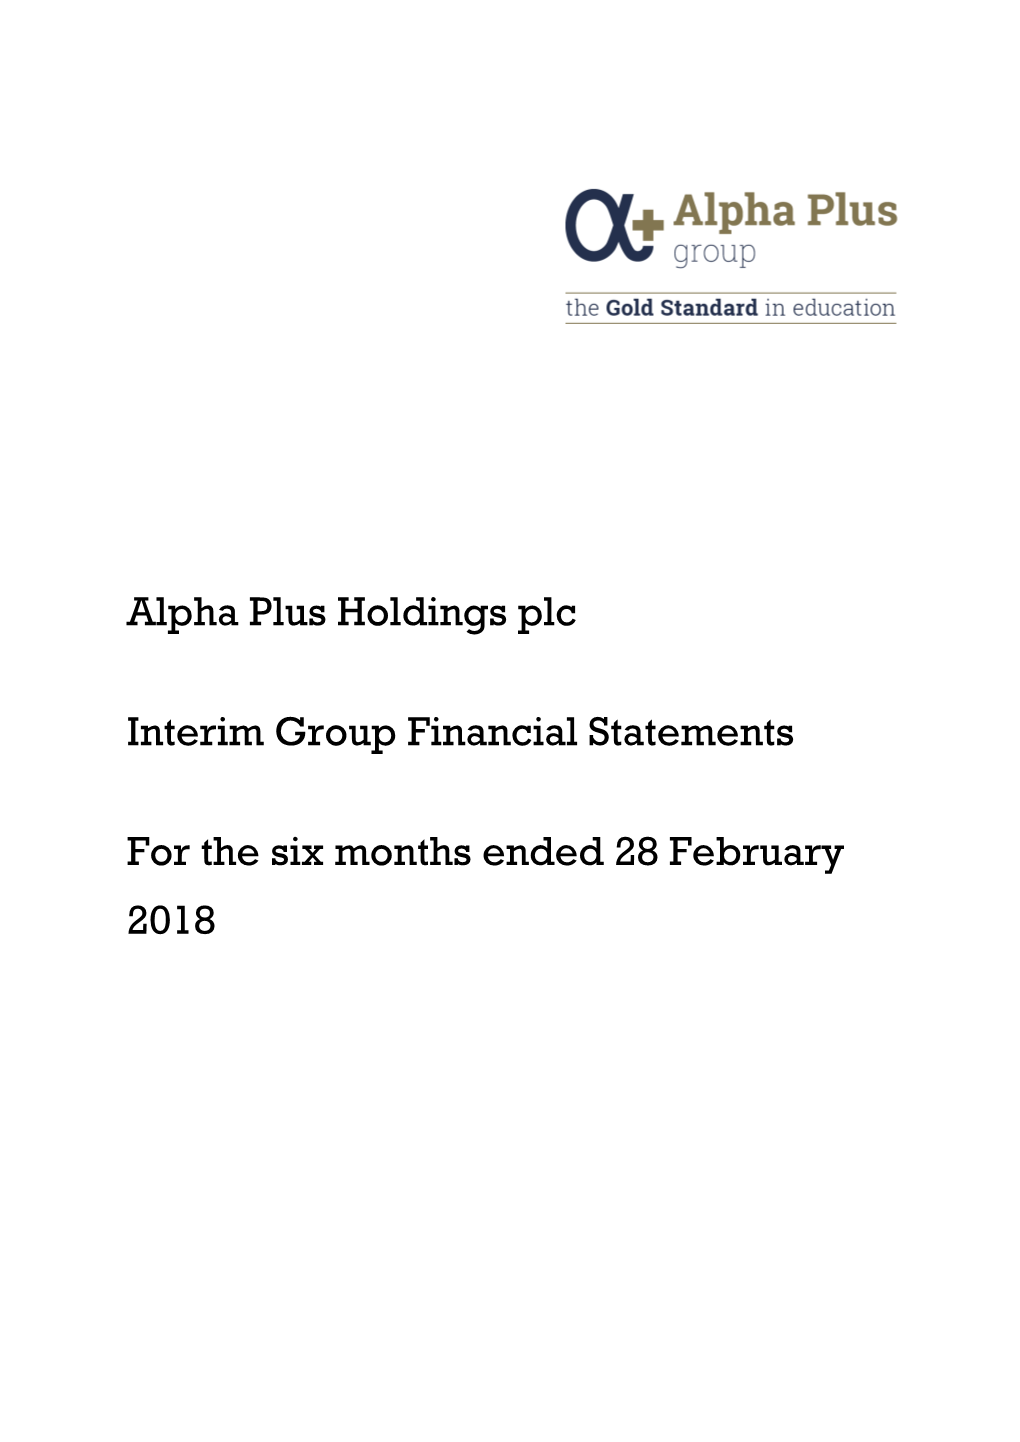 Alpha Plus Holdings Plc Interim Group Financial Statements – Six Months Ended 28 February 2018